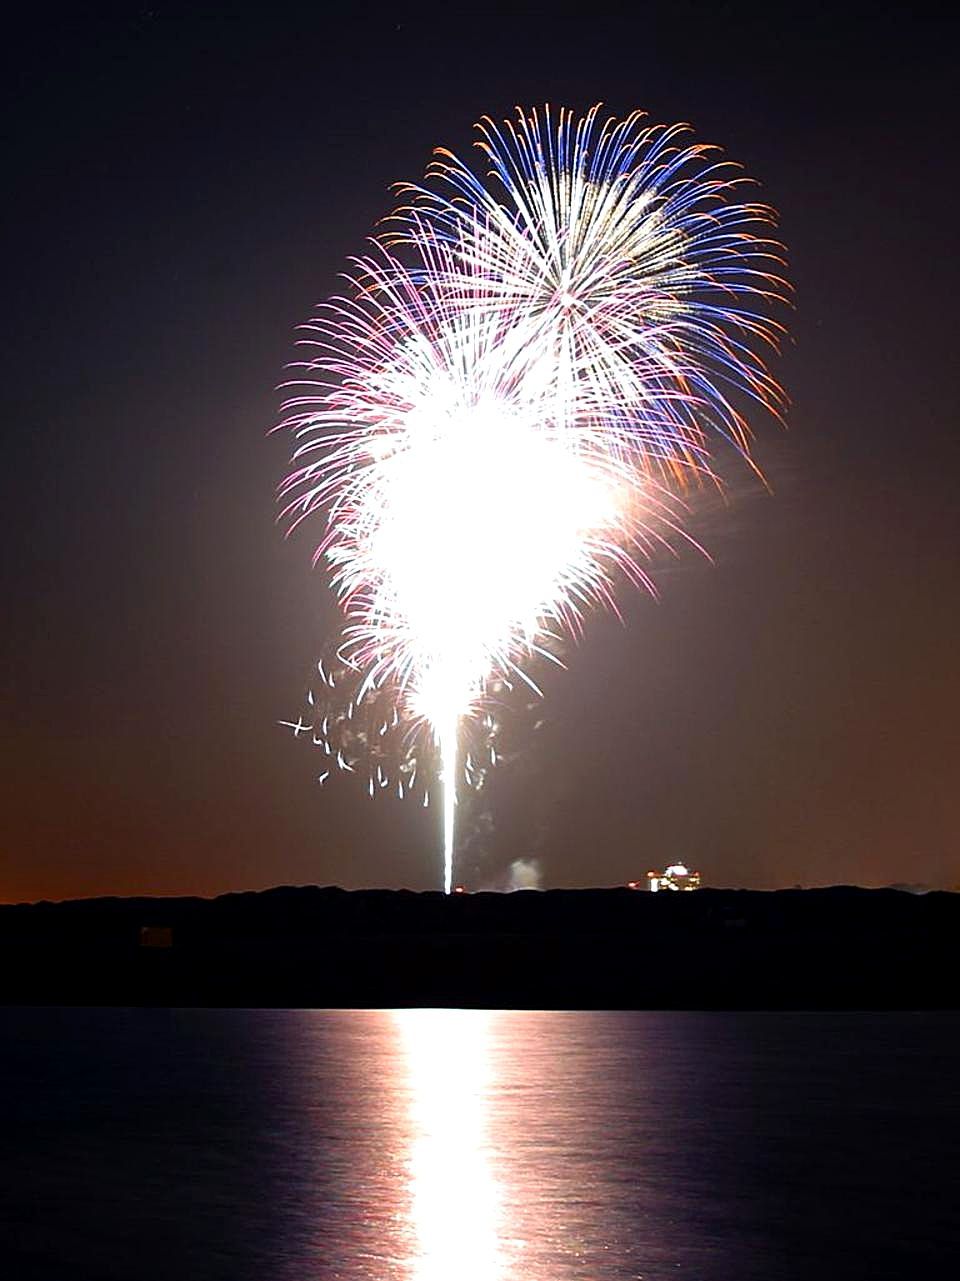 Fireworks explode in the night sky. A reflection of the fireworks is seen on water below.